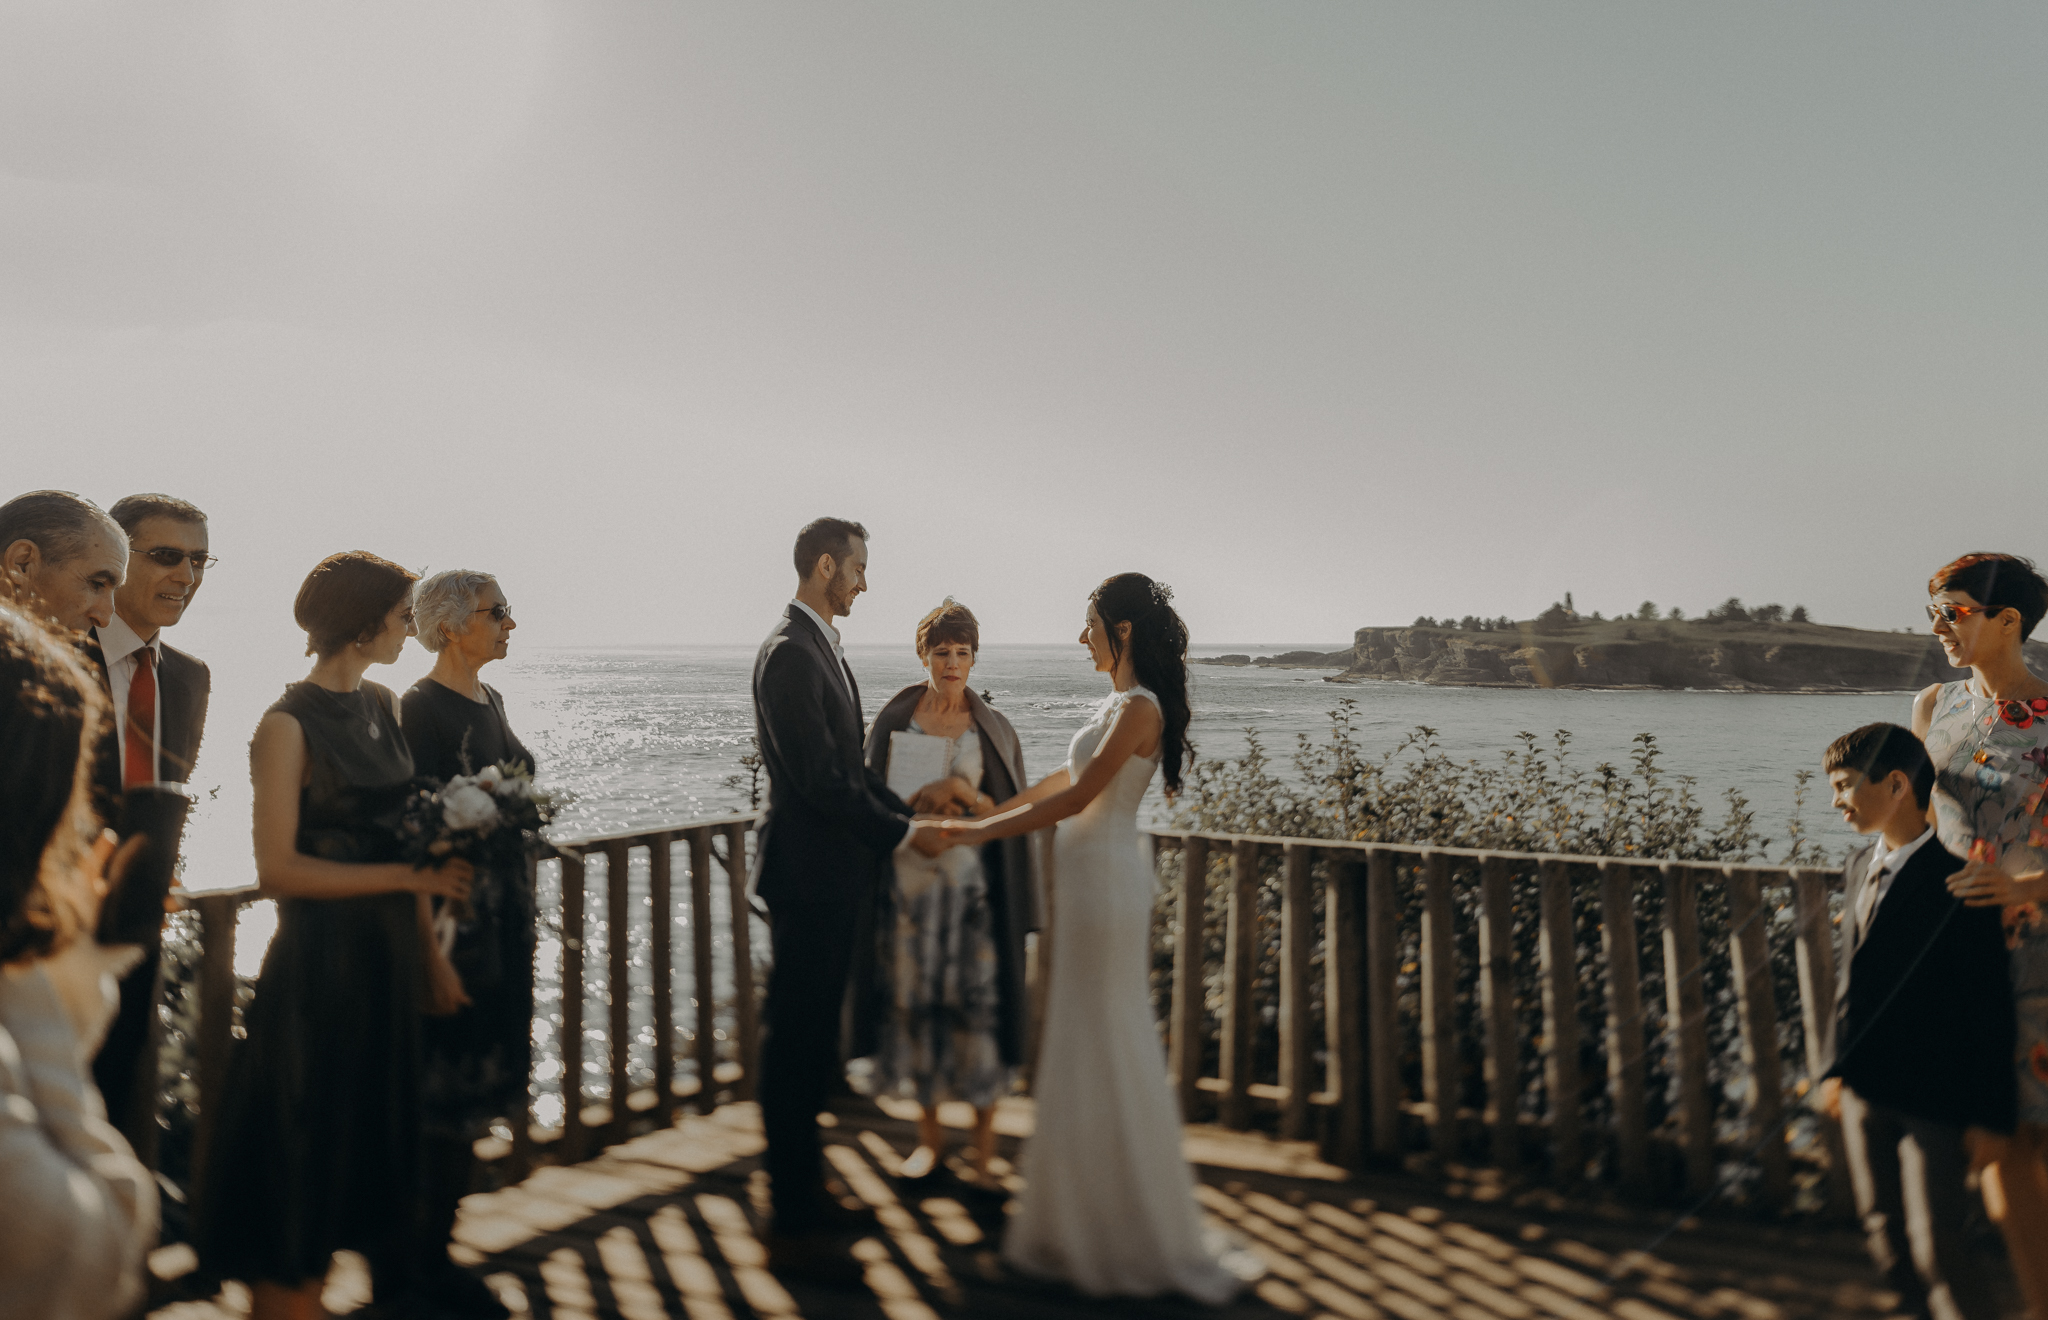 Isaiah + Taylor Photography - Cape Flattery Elopement, Olympia National Forest Wedding Photographer-043.jpg